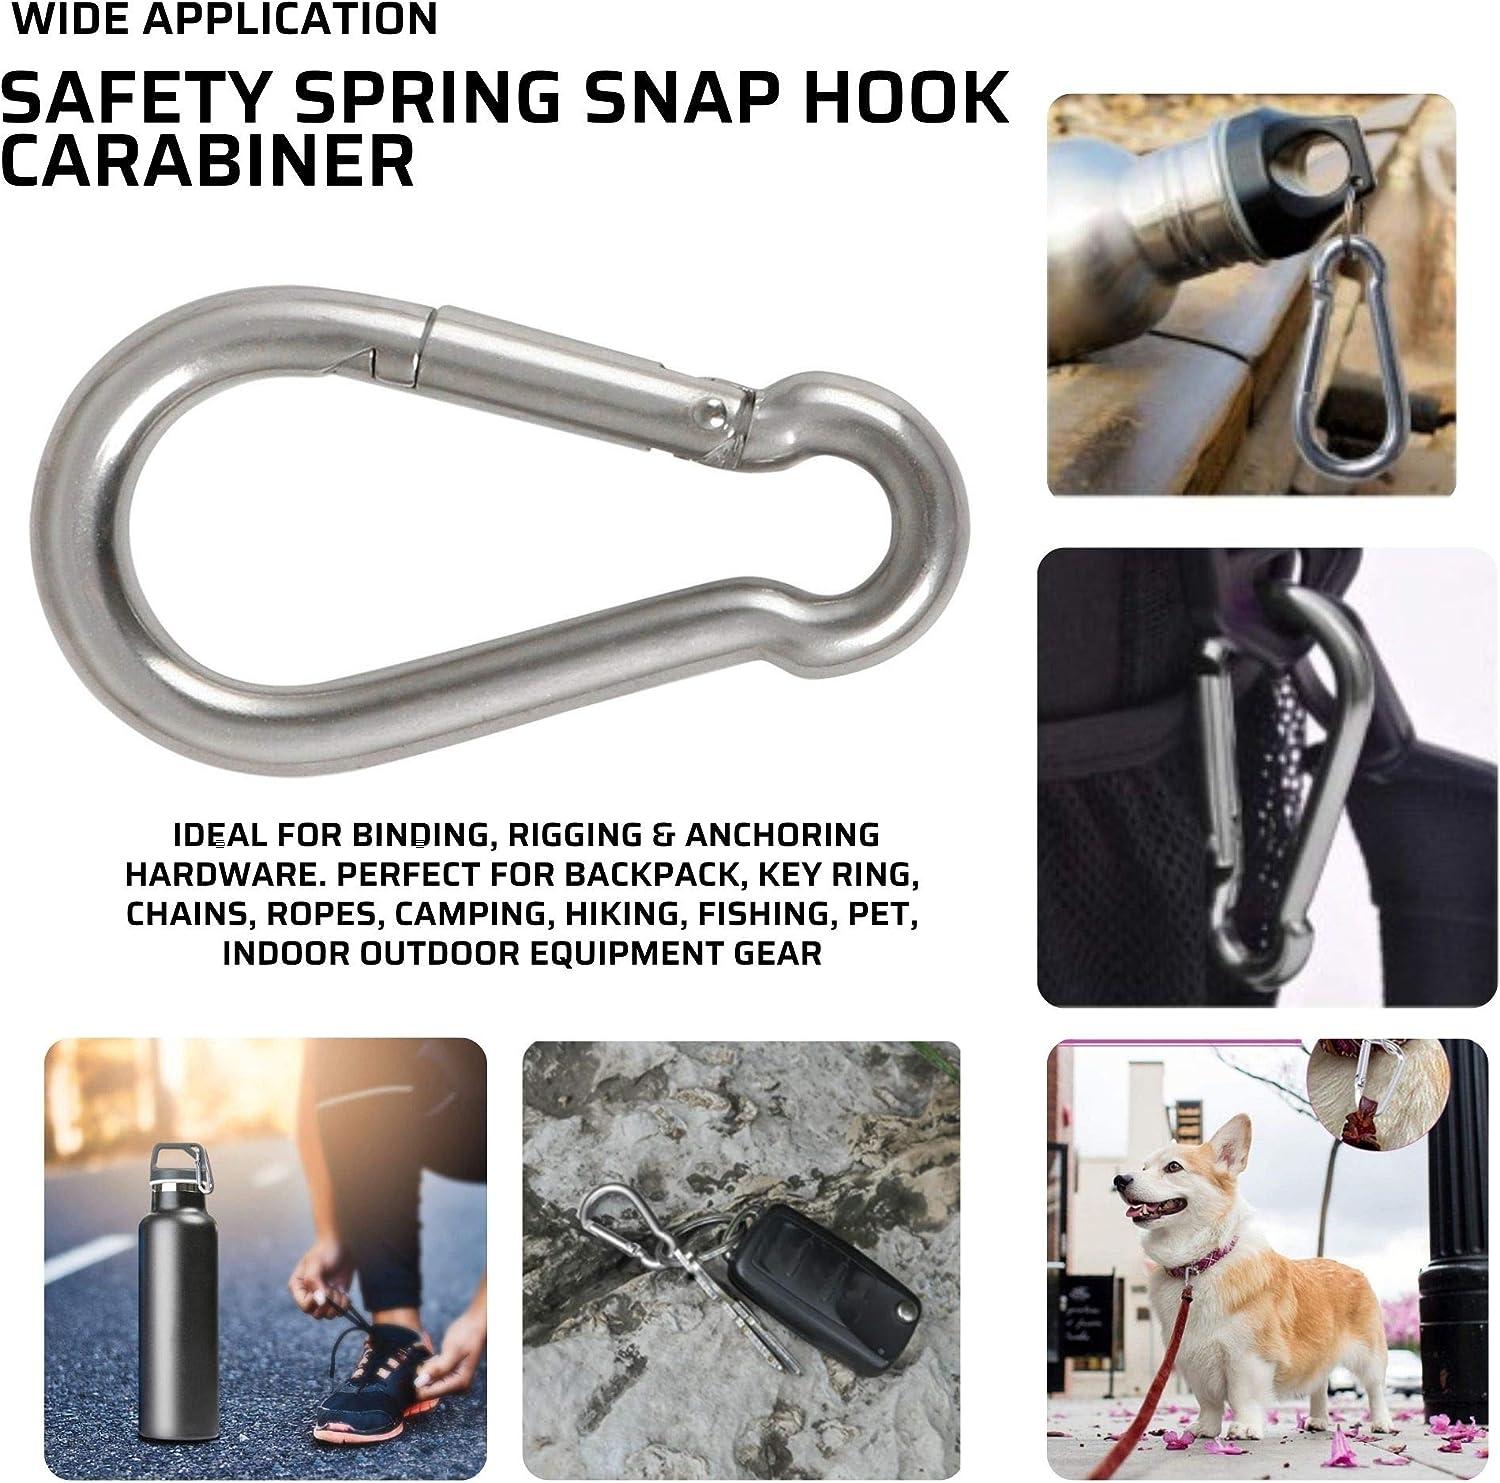 6 Pack of 2 1/4 Inches Stainless Steel Safety Spring Snap Hook Carabiner,  Multi-Purpose Heavy Duty Stainless Steel Carabiner Clips for Keys Swing Set  Camping Fishing Hiking Traveling